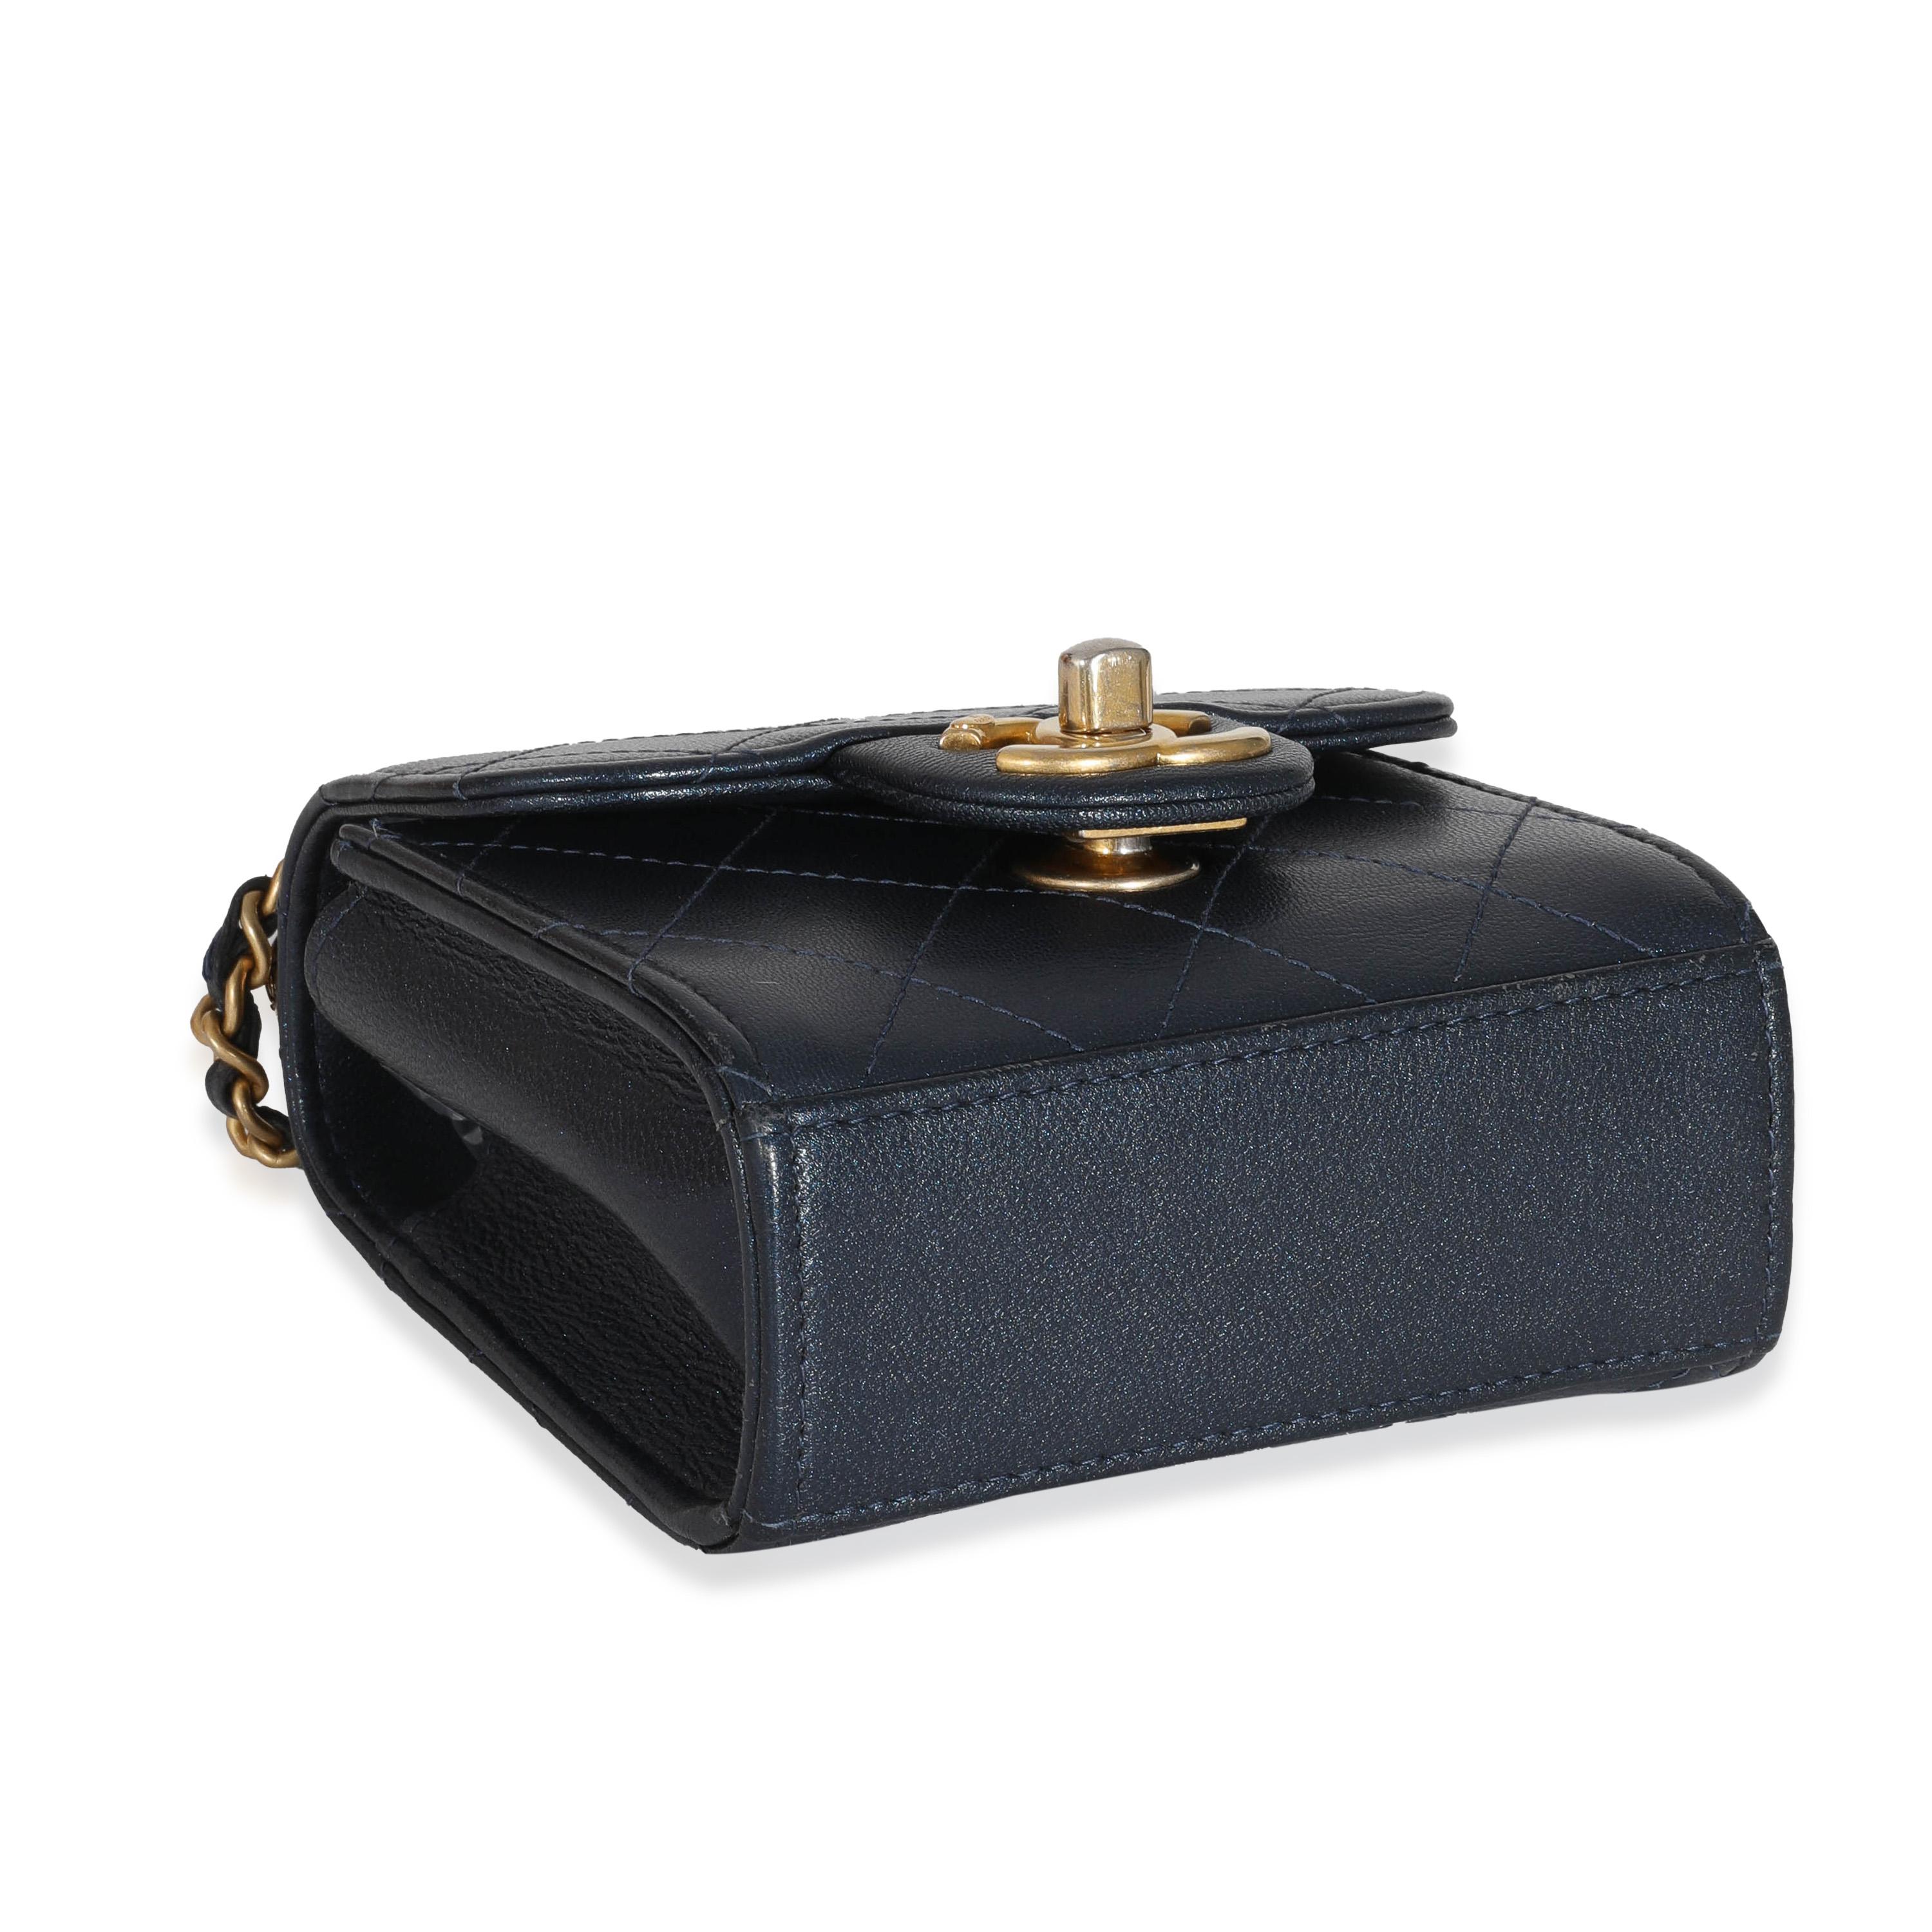 Listing Title: Chanel Navy Goatskin Chic Pearls Mini Flap Bag
SKU: 131801
Condition: Pre-owned 
Condition Description: A timeless classic that never goes out of style, the flap bag from Chanel dates back to 1955 and has seen a number of updates. The